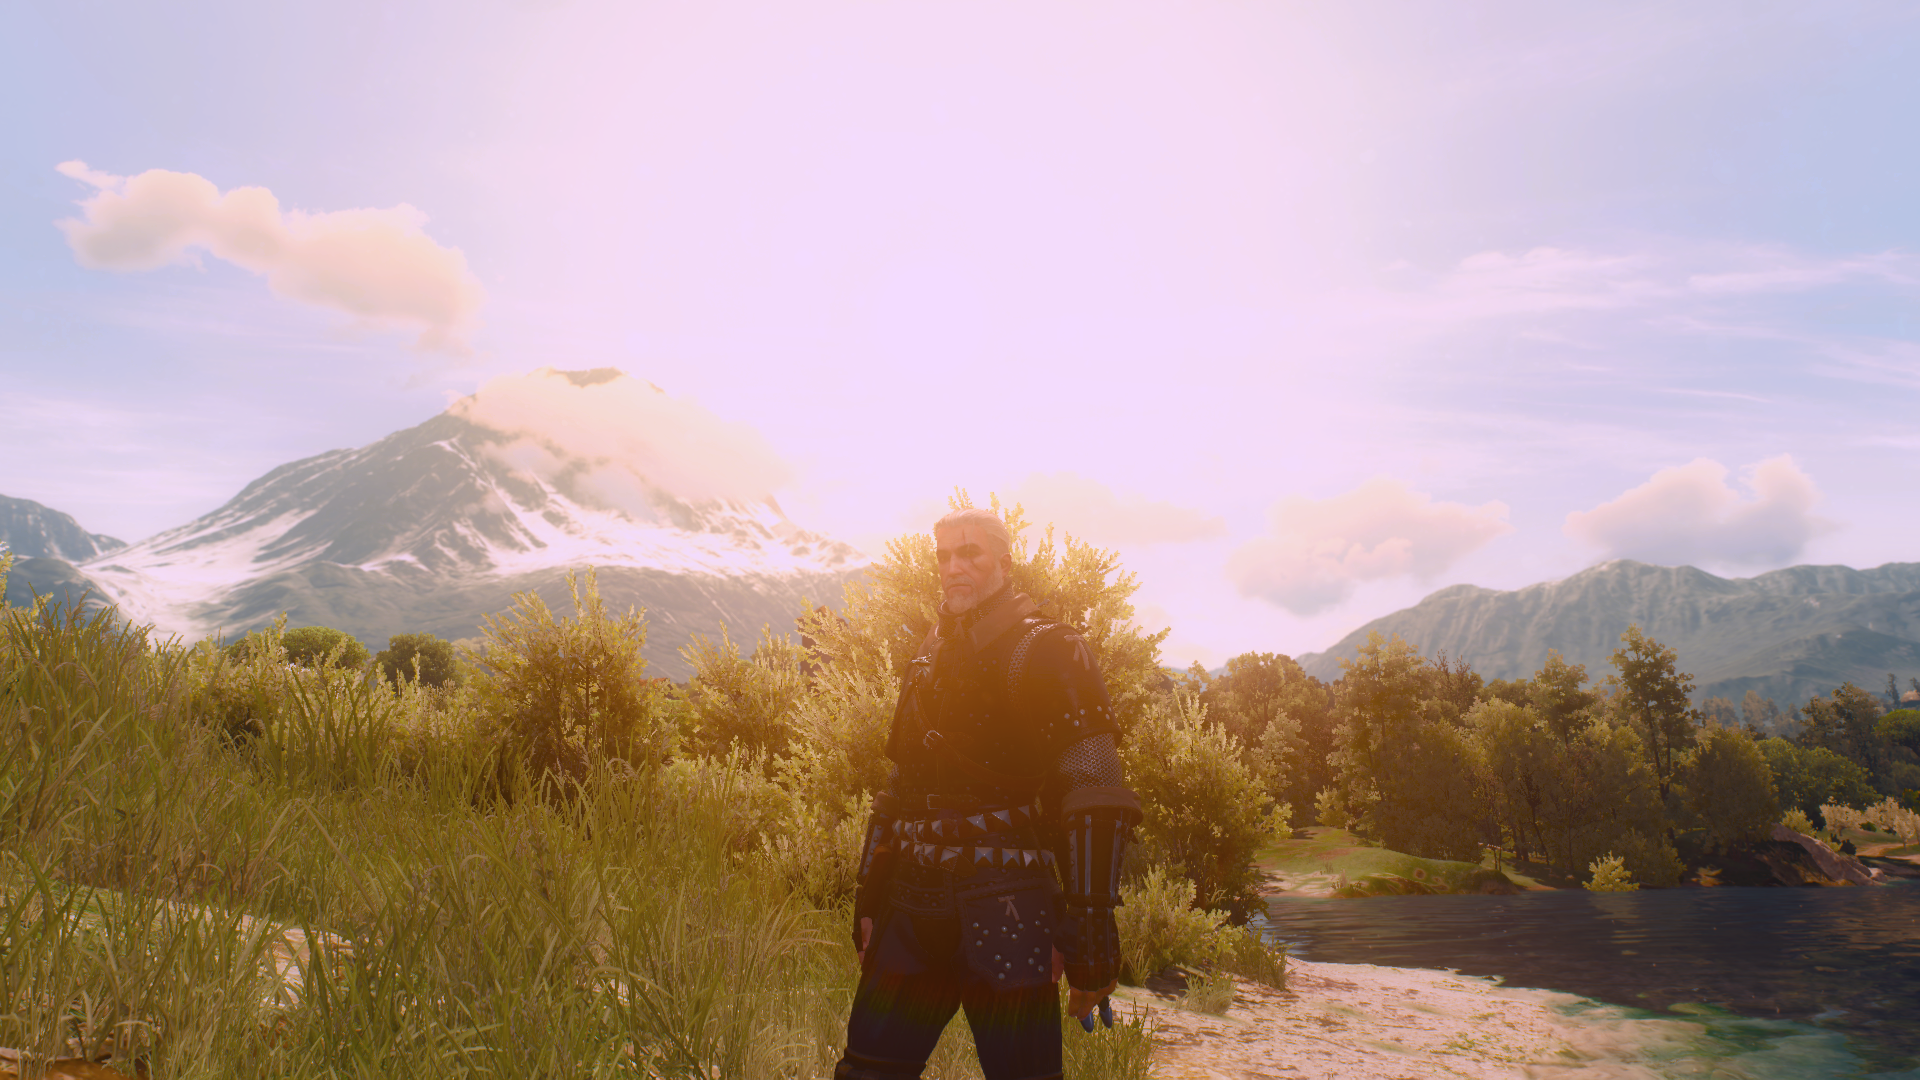 The Witcher 3 The Witcher 3 Wild Hunt The Witcher 3 Wild Hunt Blood And Wine 1920x1080